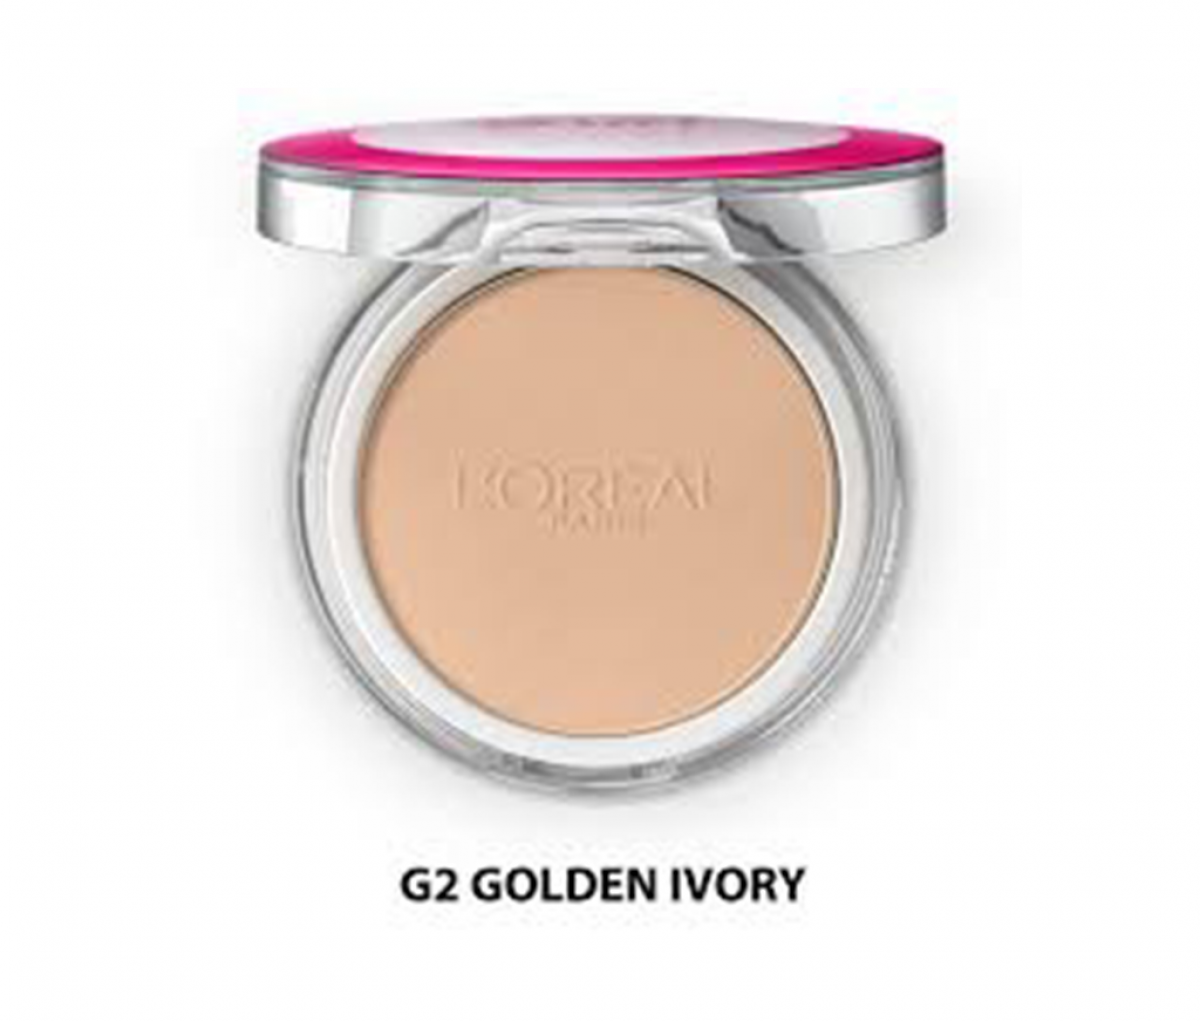 L OREAL PARIS MAT MAGIQUE ALL-IN-ONE POWDER G2 GOLD IVORY